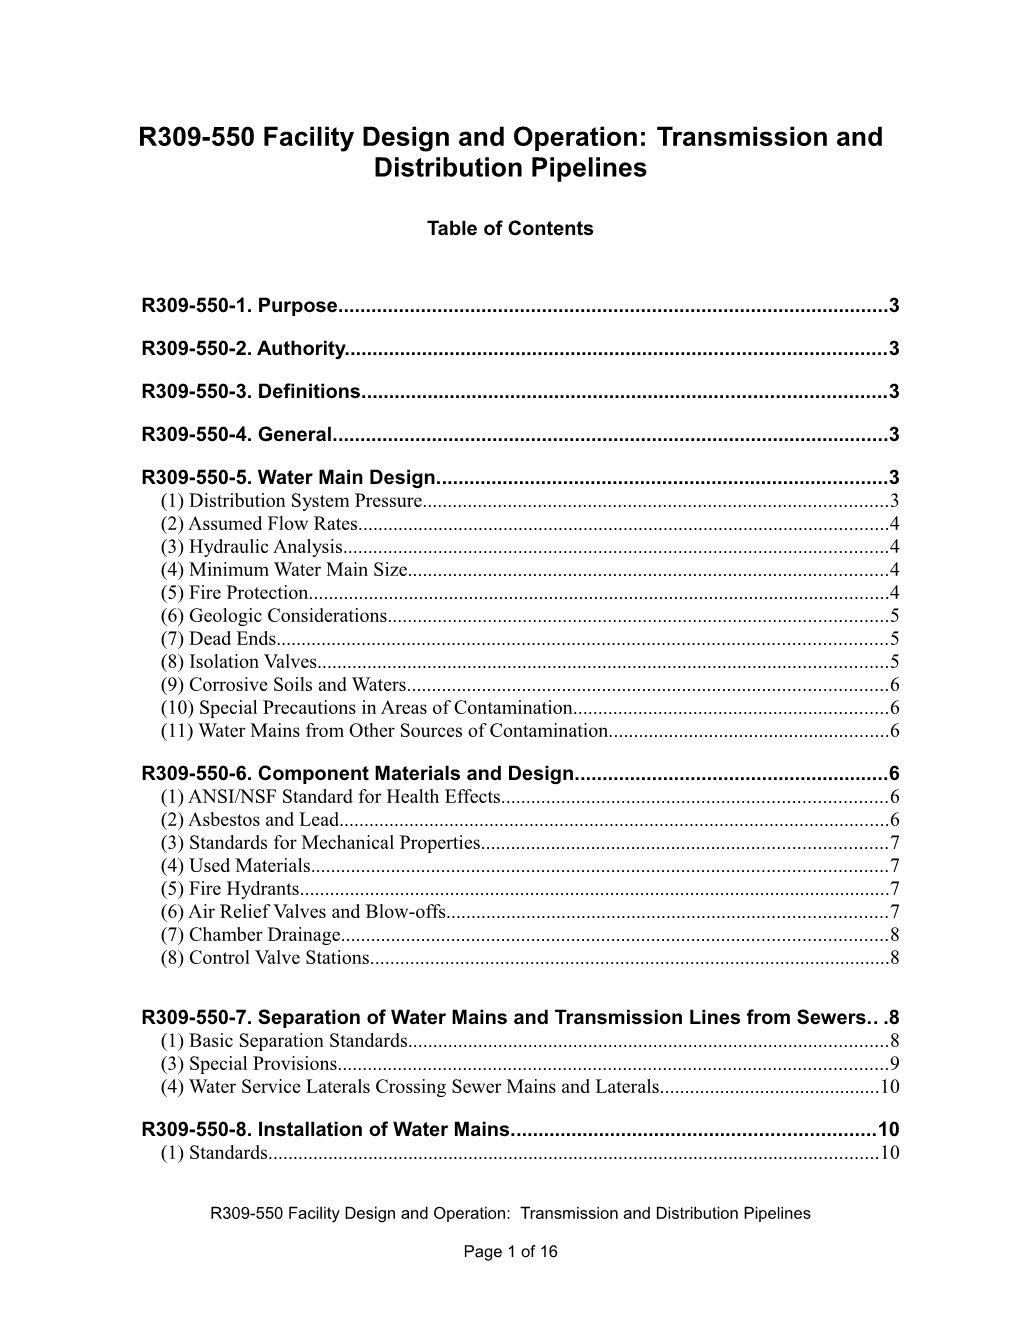 R309-550 Facility Design and Operation: Transmission and Distribution Pipelines